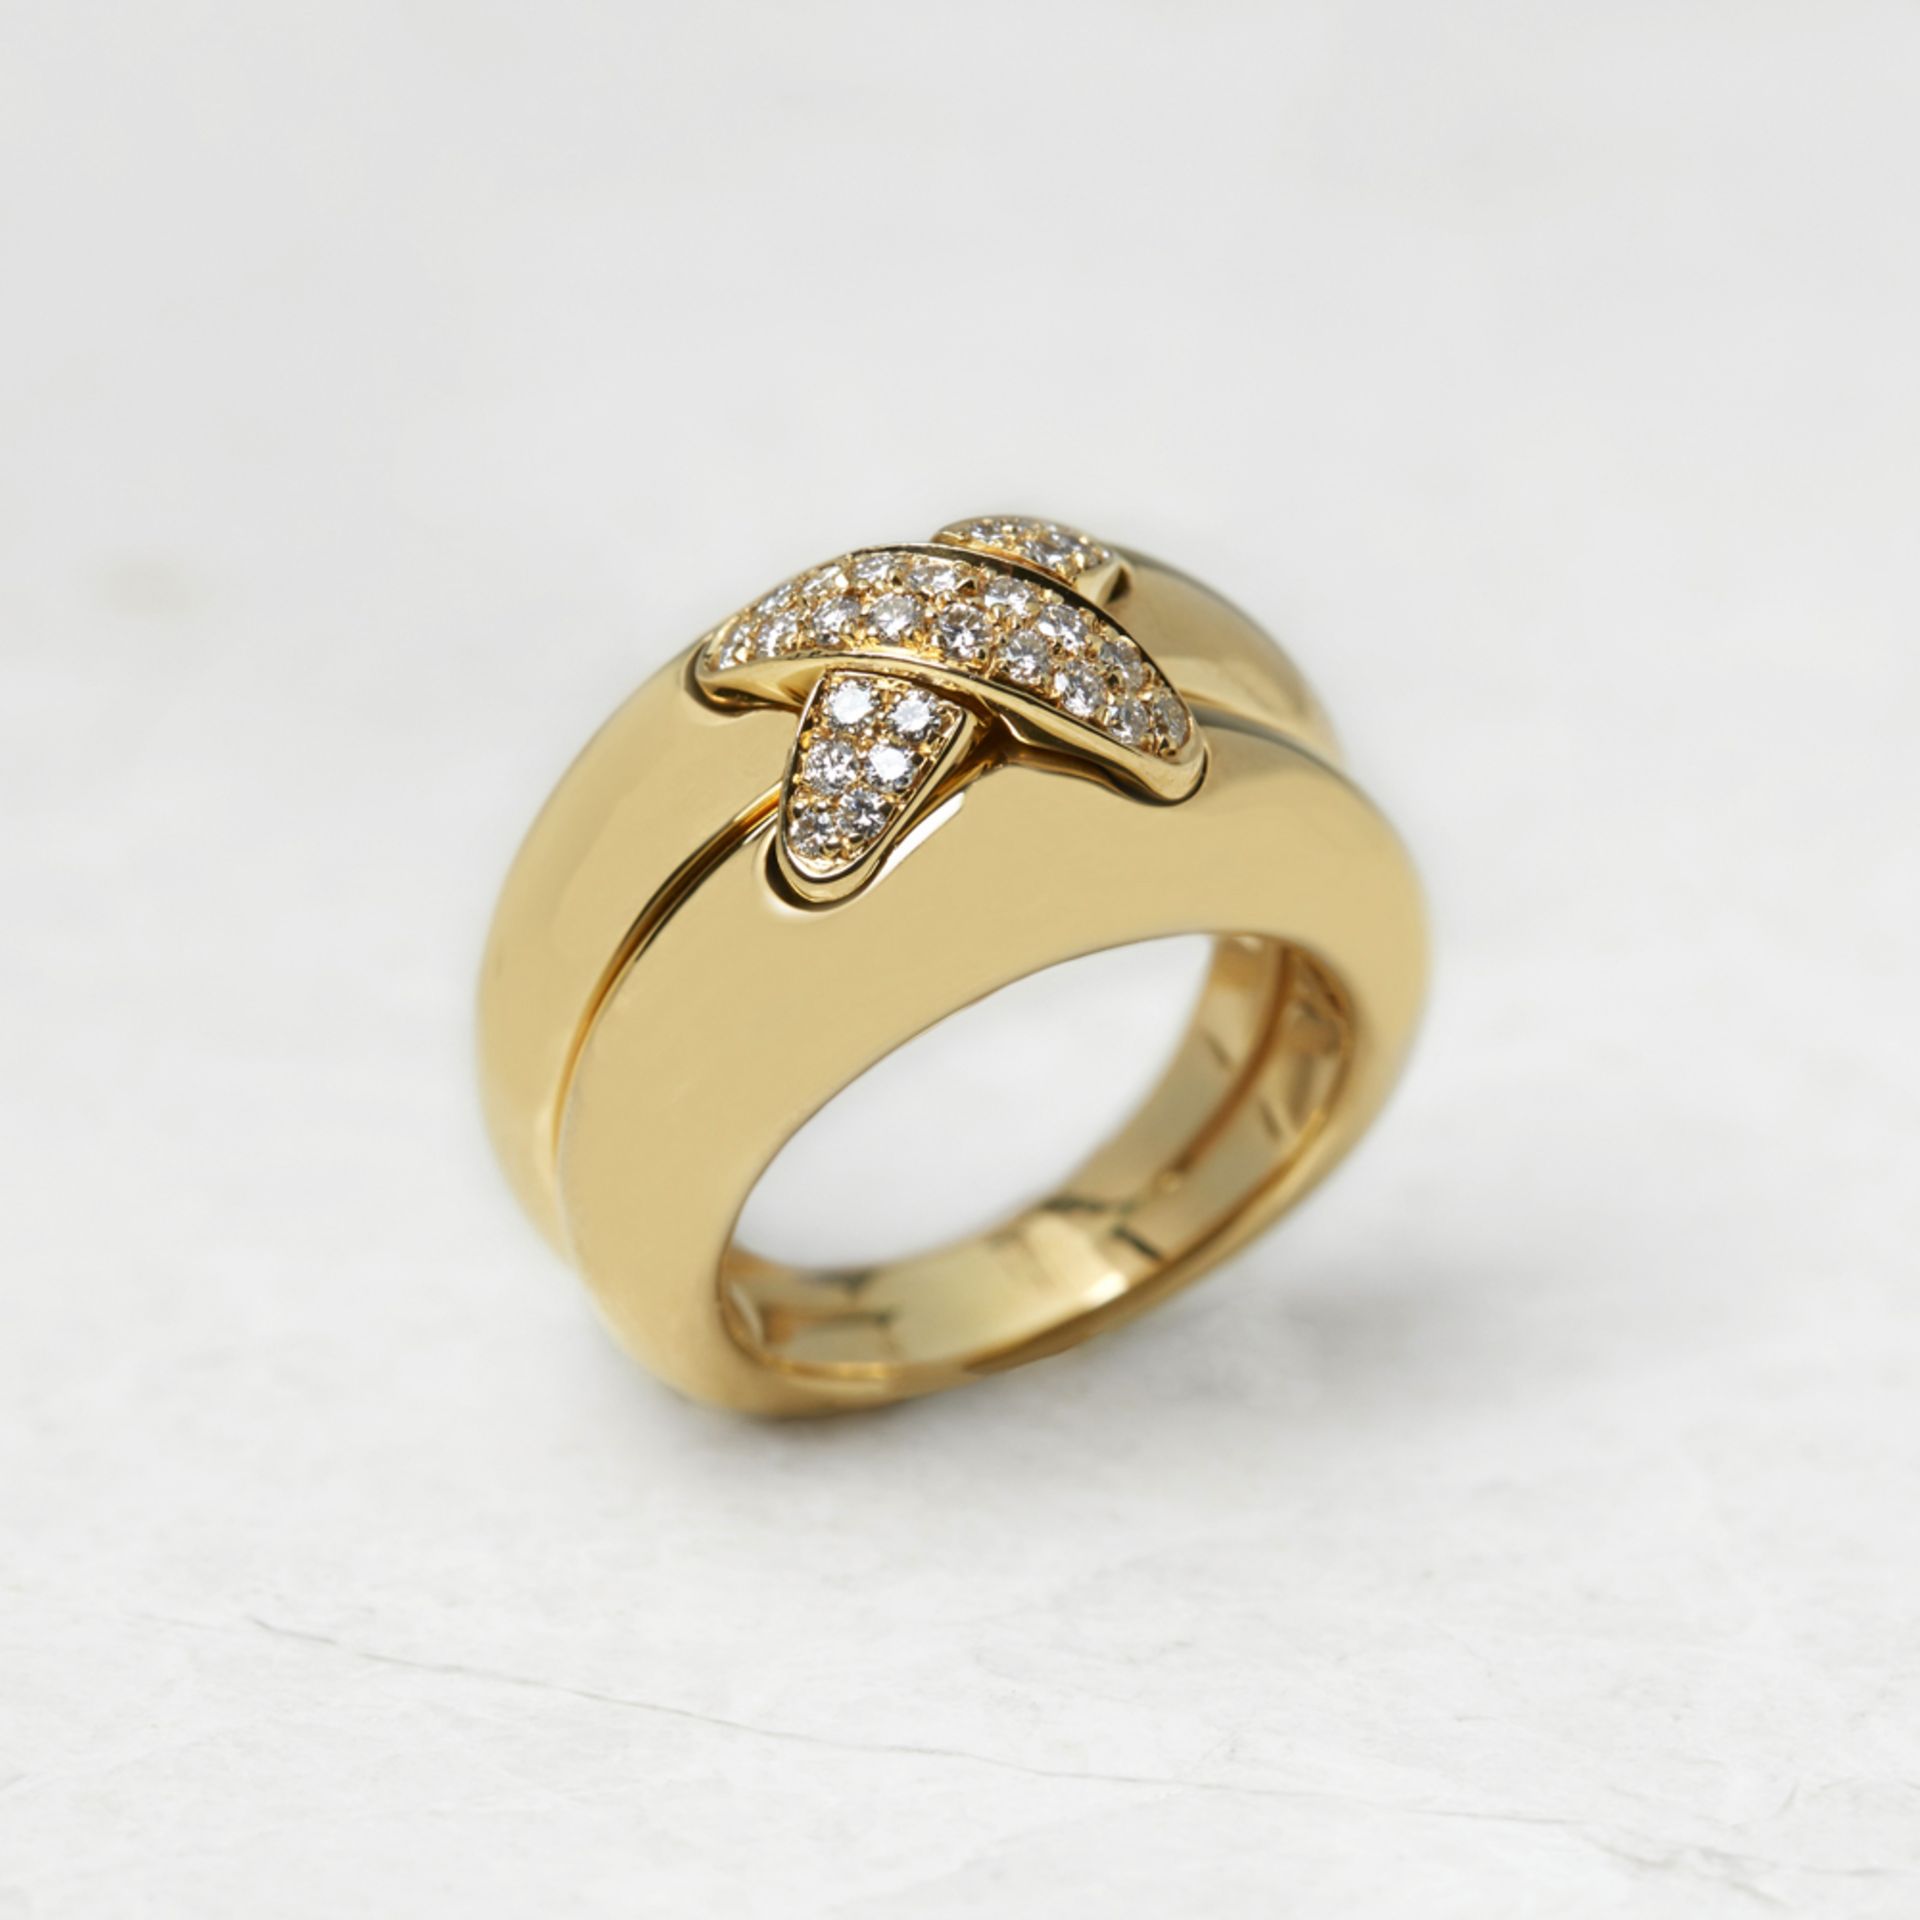 Chaumet 18k Yellow Gold 0.30ct Diamond Liens Ring - Image 7 of 16